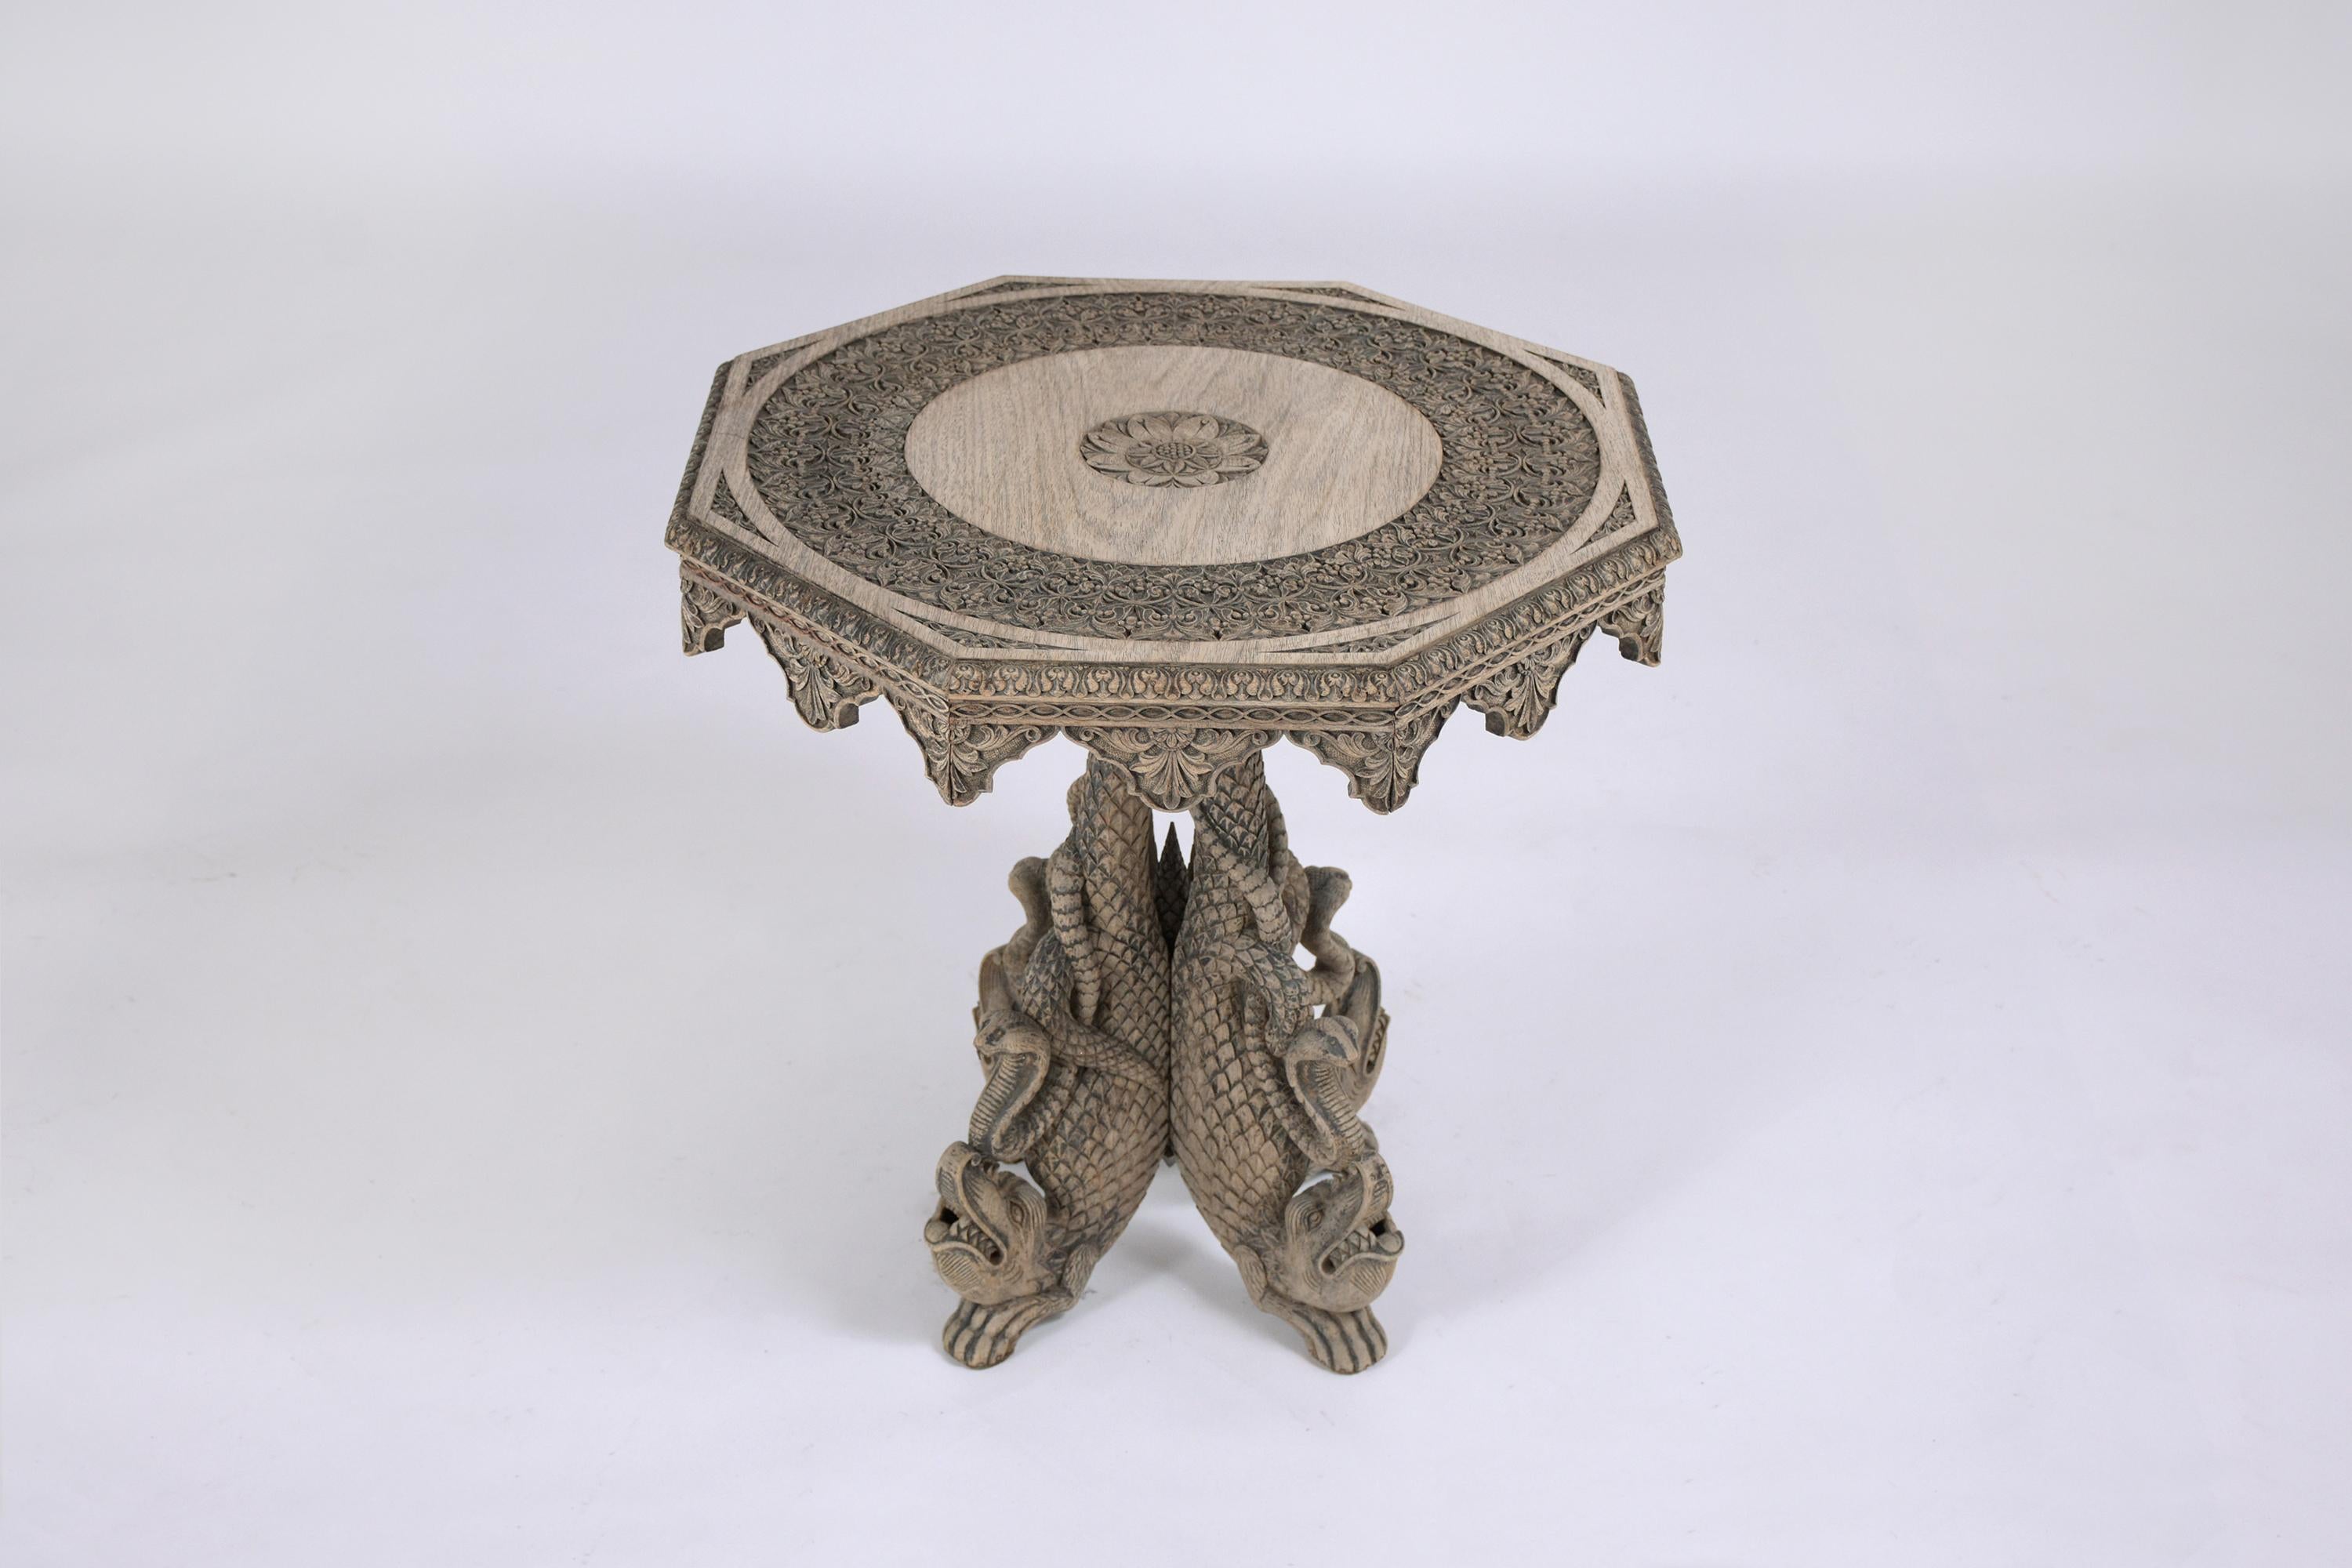 Dive deep into the world of timeless craftsmanship with our exceptional antique side table, hand-crafted from premium walnut wood. Dating back to the early 1900s, this Baroque-inspired end table stands in good condition, echoing the meticulous